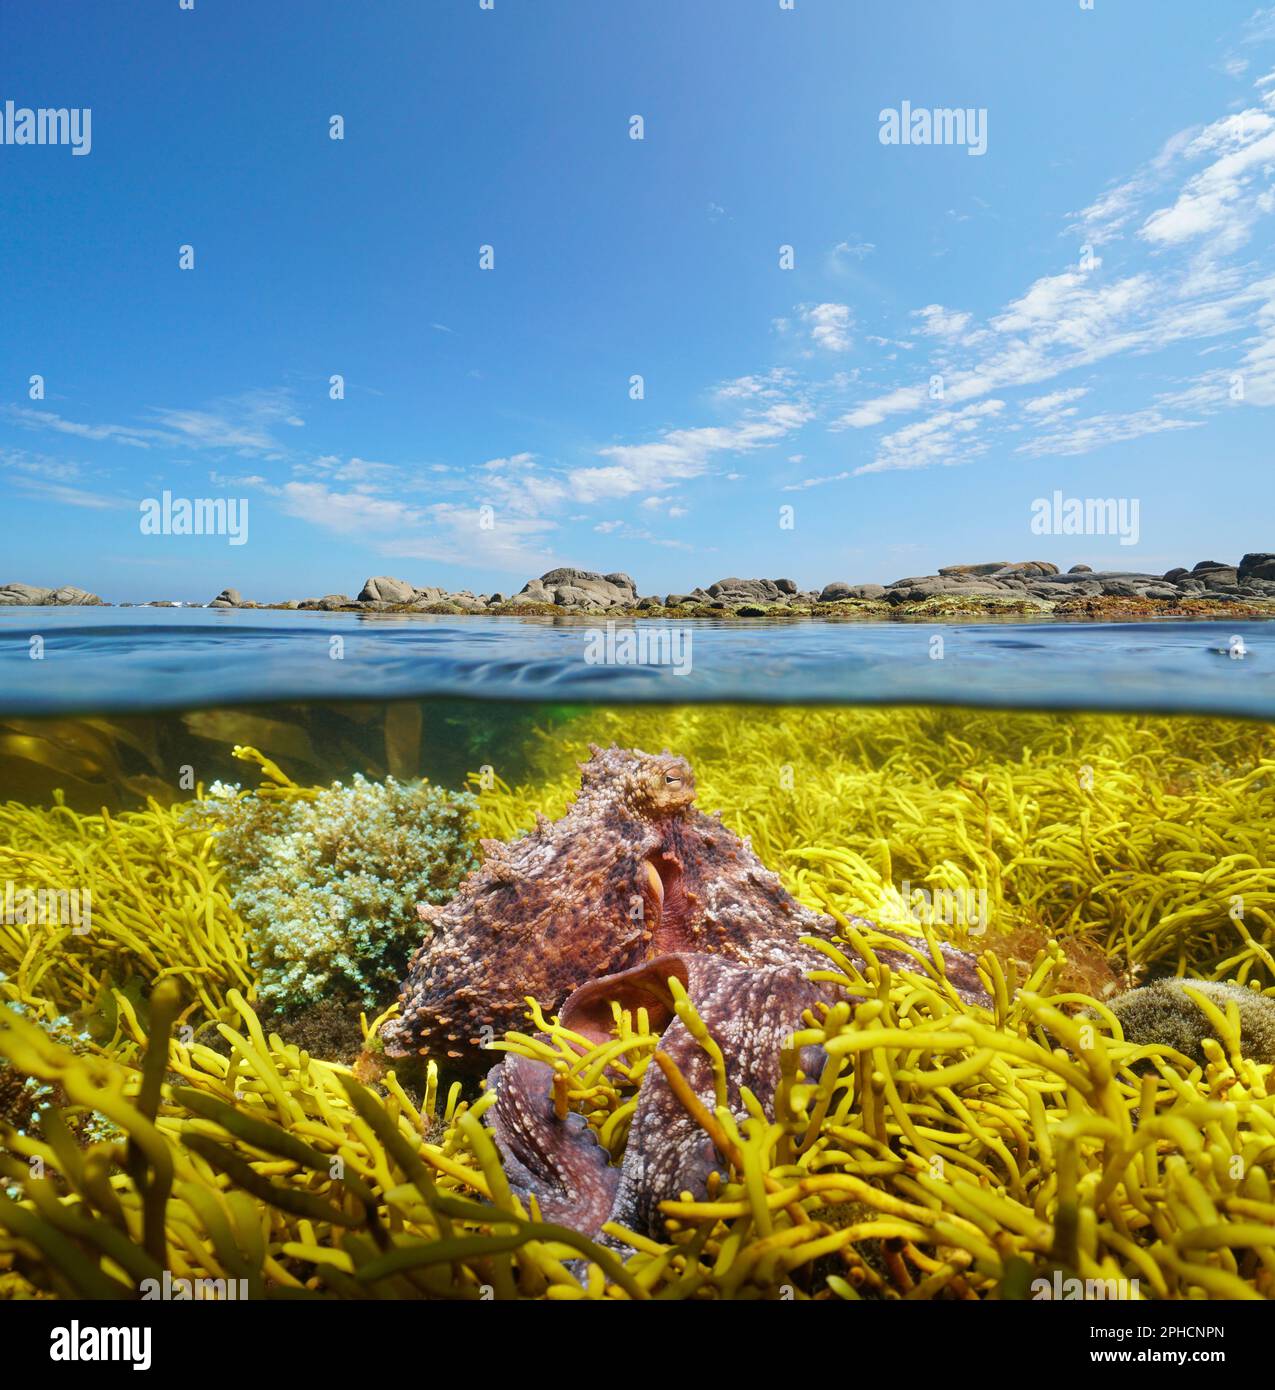 Octopus with algae underwater near rocky sea shore and blue sky with some cloud, Atlantic ocean seascape, split view over and under water surface Stock Photo